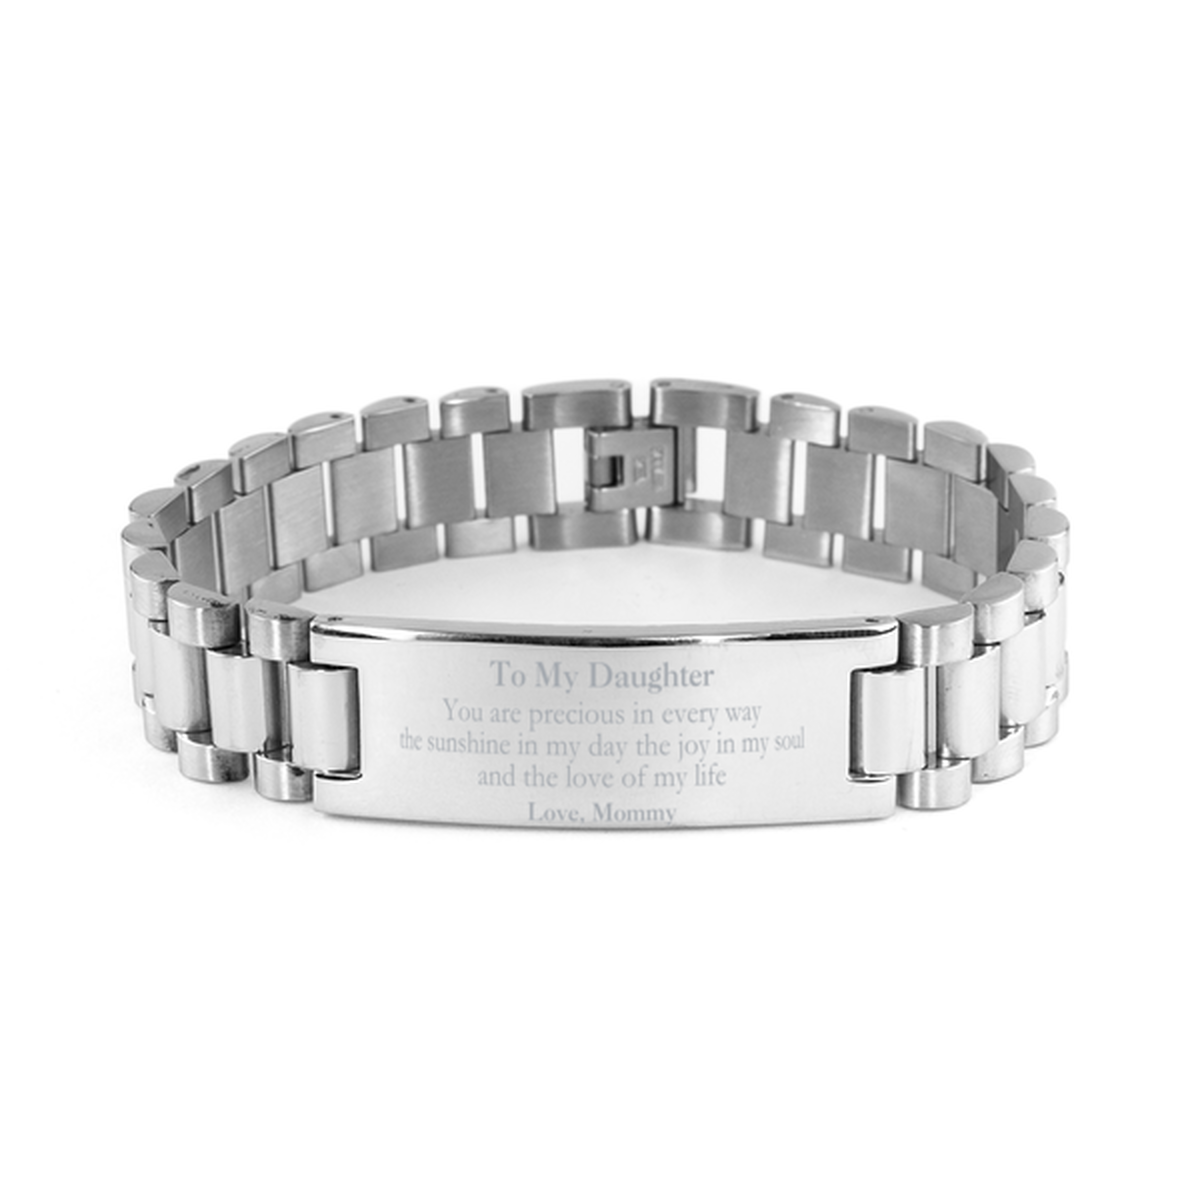 Graduation Gifts for Daughter Ladder Stainless Steel Bracelet Present from Mommy, Christmas Daughter Birthday Gifts Daughter You are precious in every way the sunshine in my day. Love, Mommy